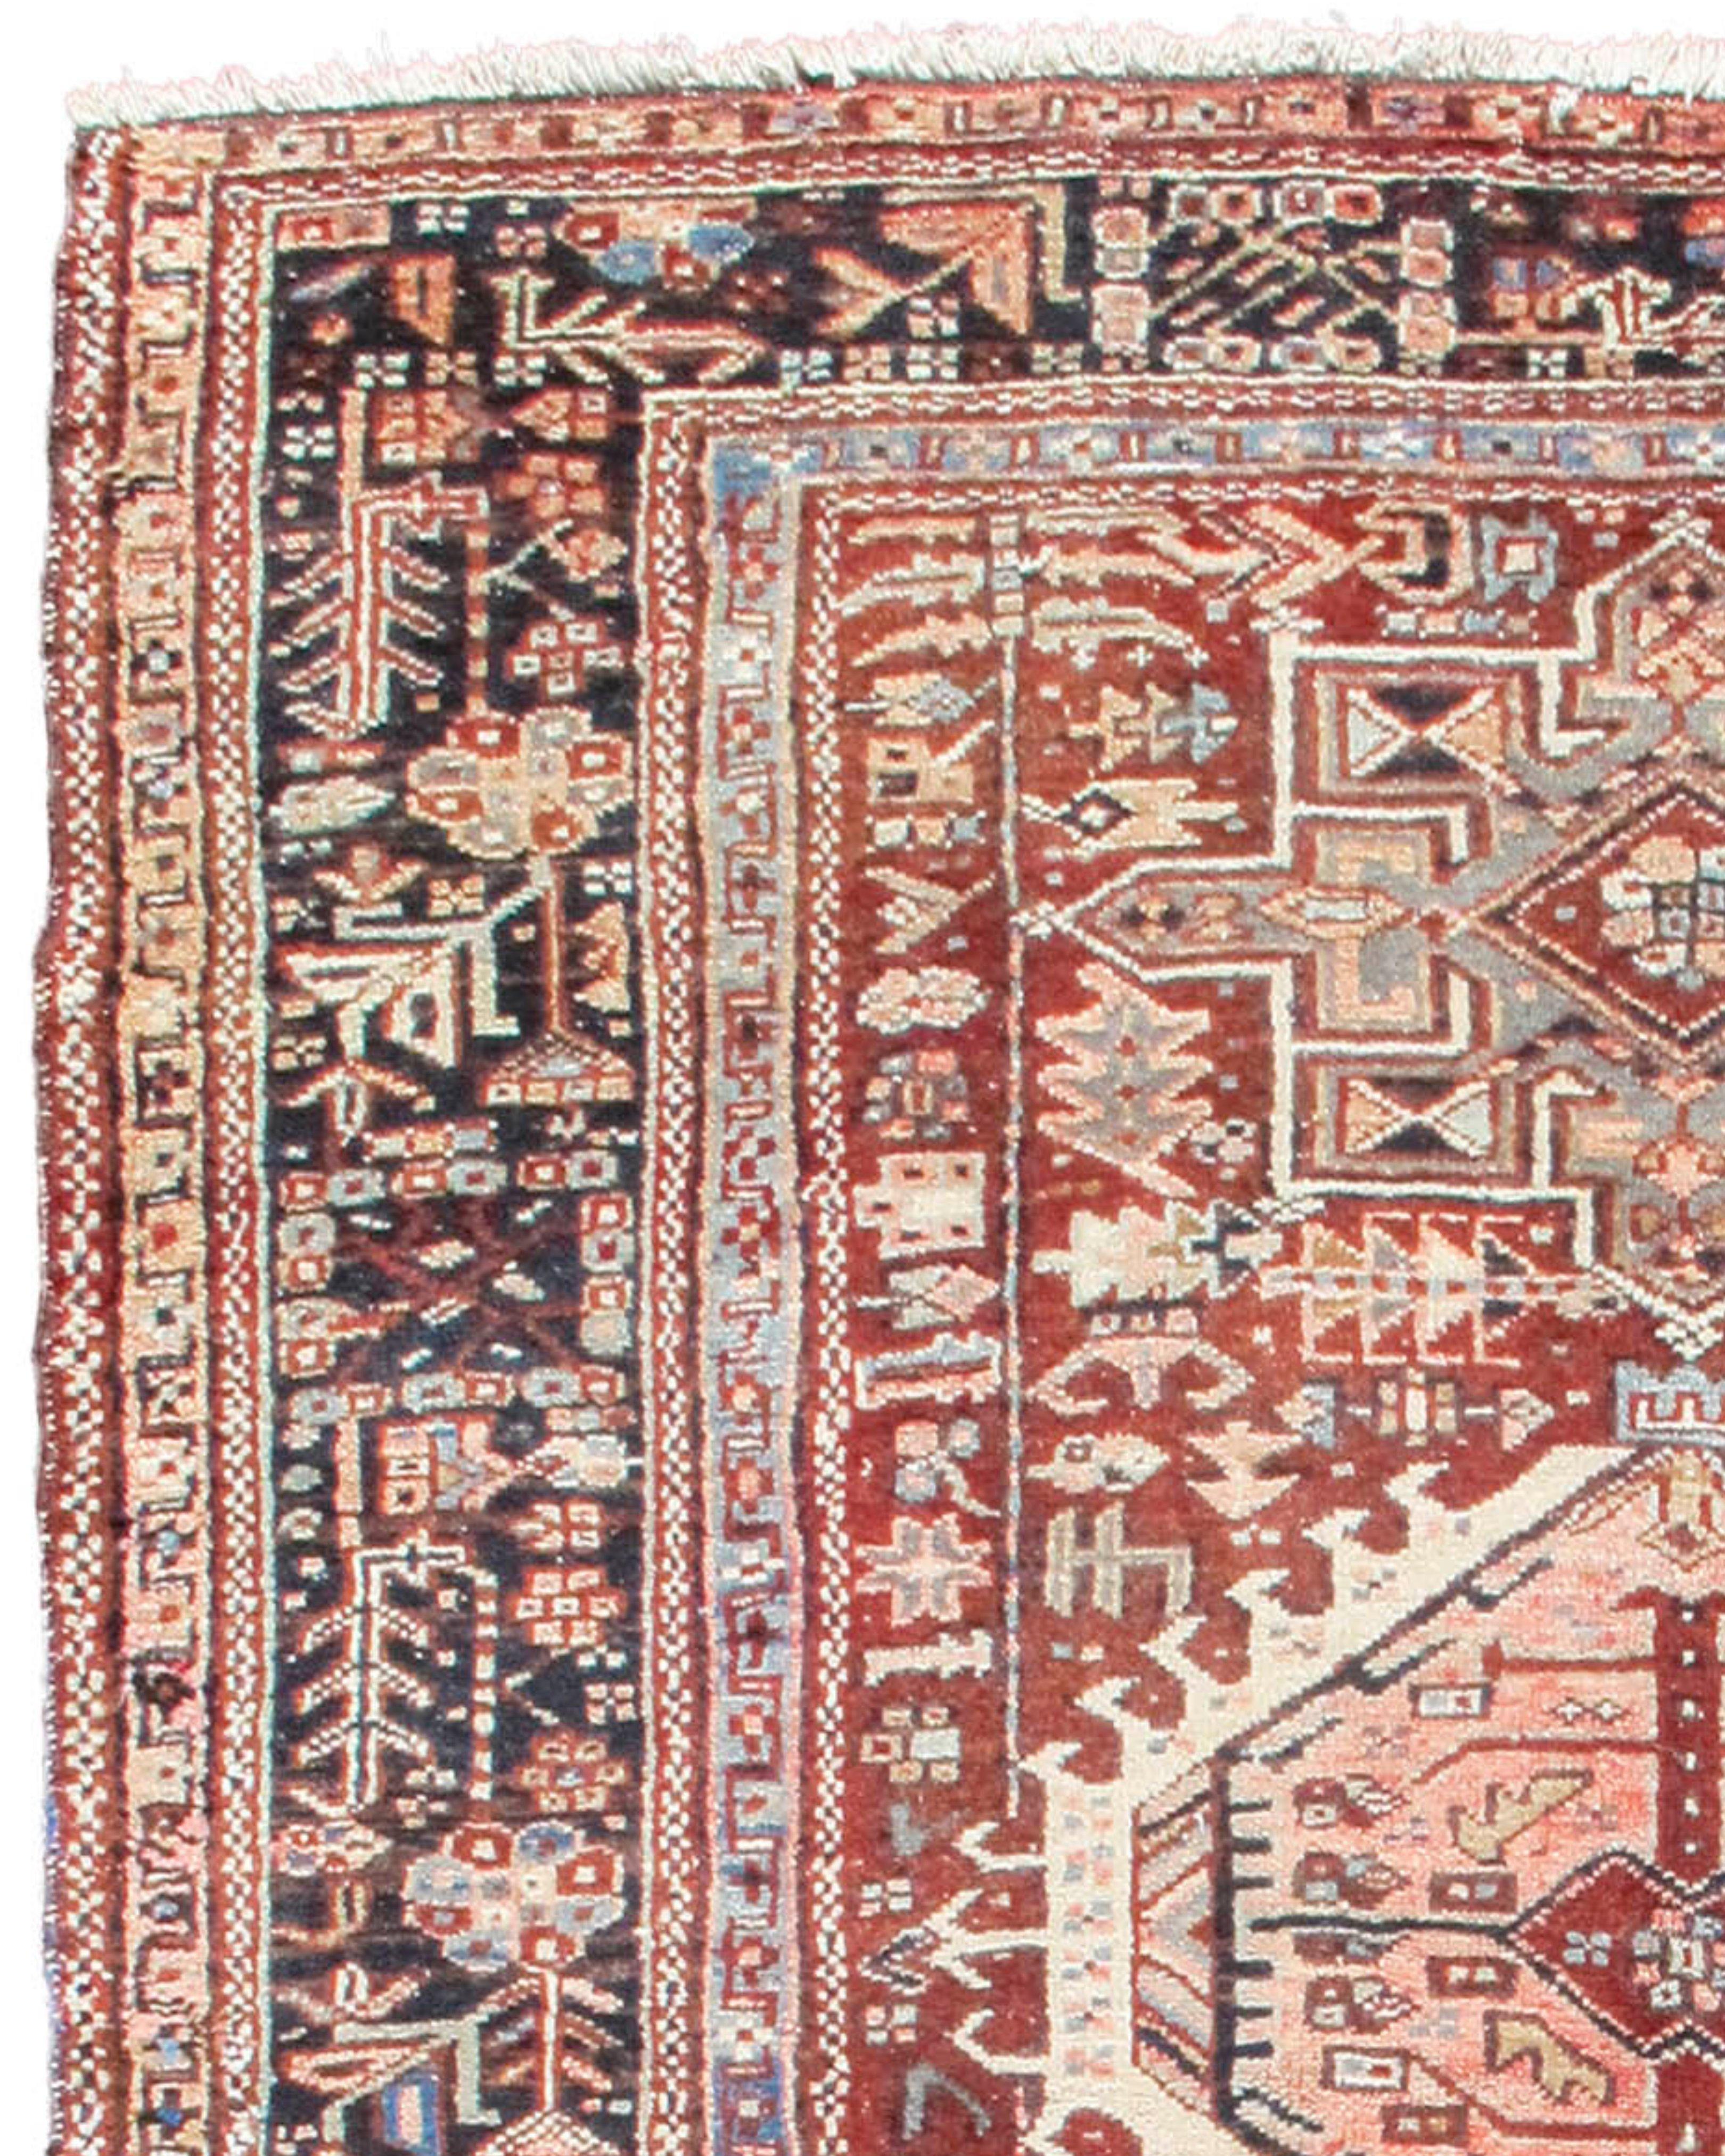 Hand-Knotted Antique Persian Karaja Rug, Mid-20th Century For Sale